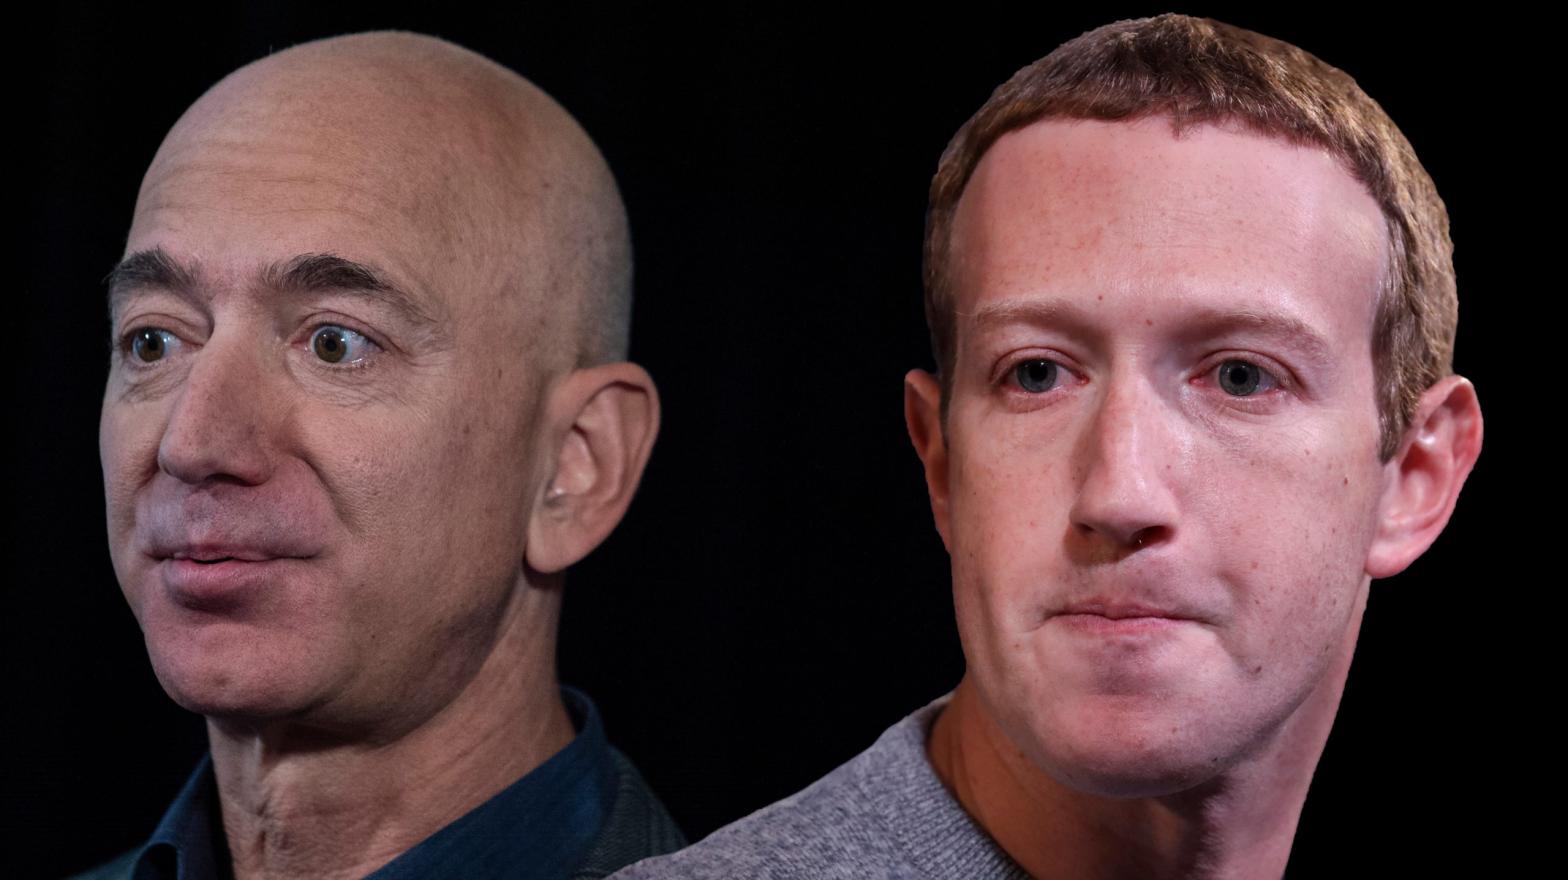 Two of the four tech giants set to testify today: Jeff Bezos of Amazon and Mark Zuckerberg of Facebook. (Tim Cook of Apple and Sundar Pichai of Alphabet/Google not pictured.) (Photo: Eric Baradat/AFP and Drew Angerer, Getty Images)